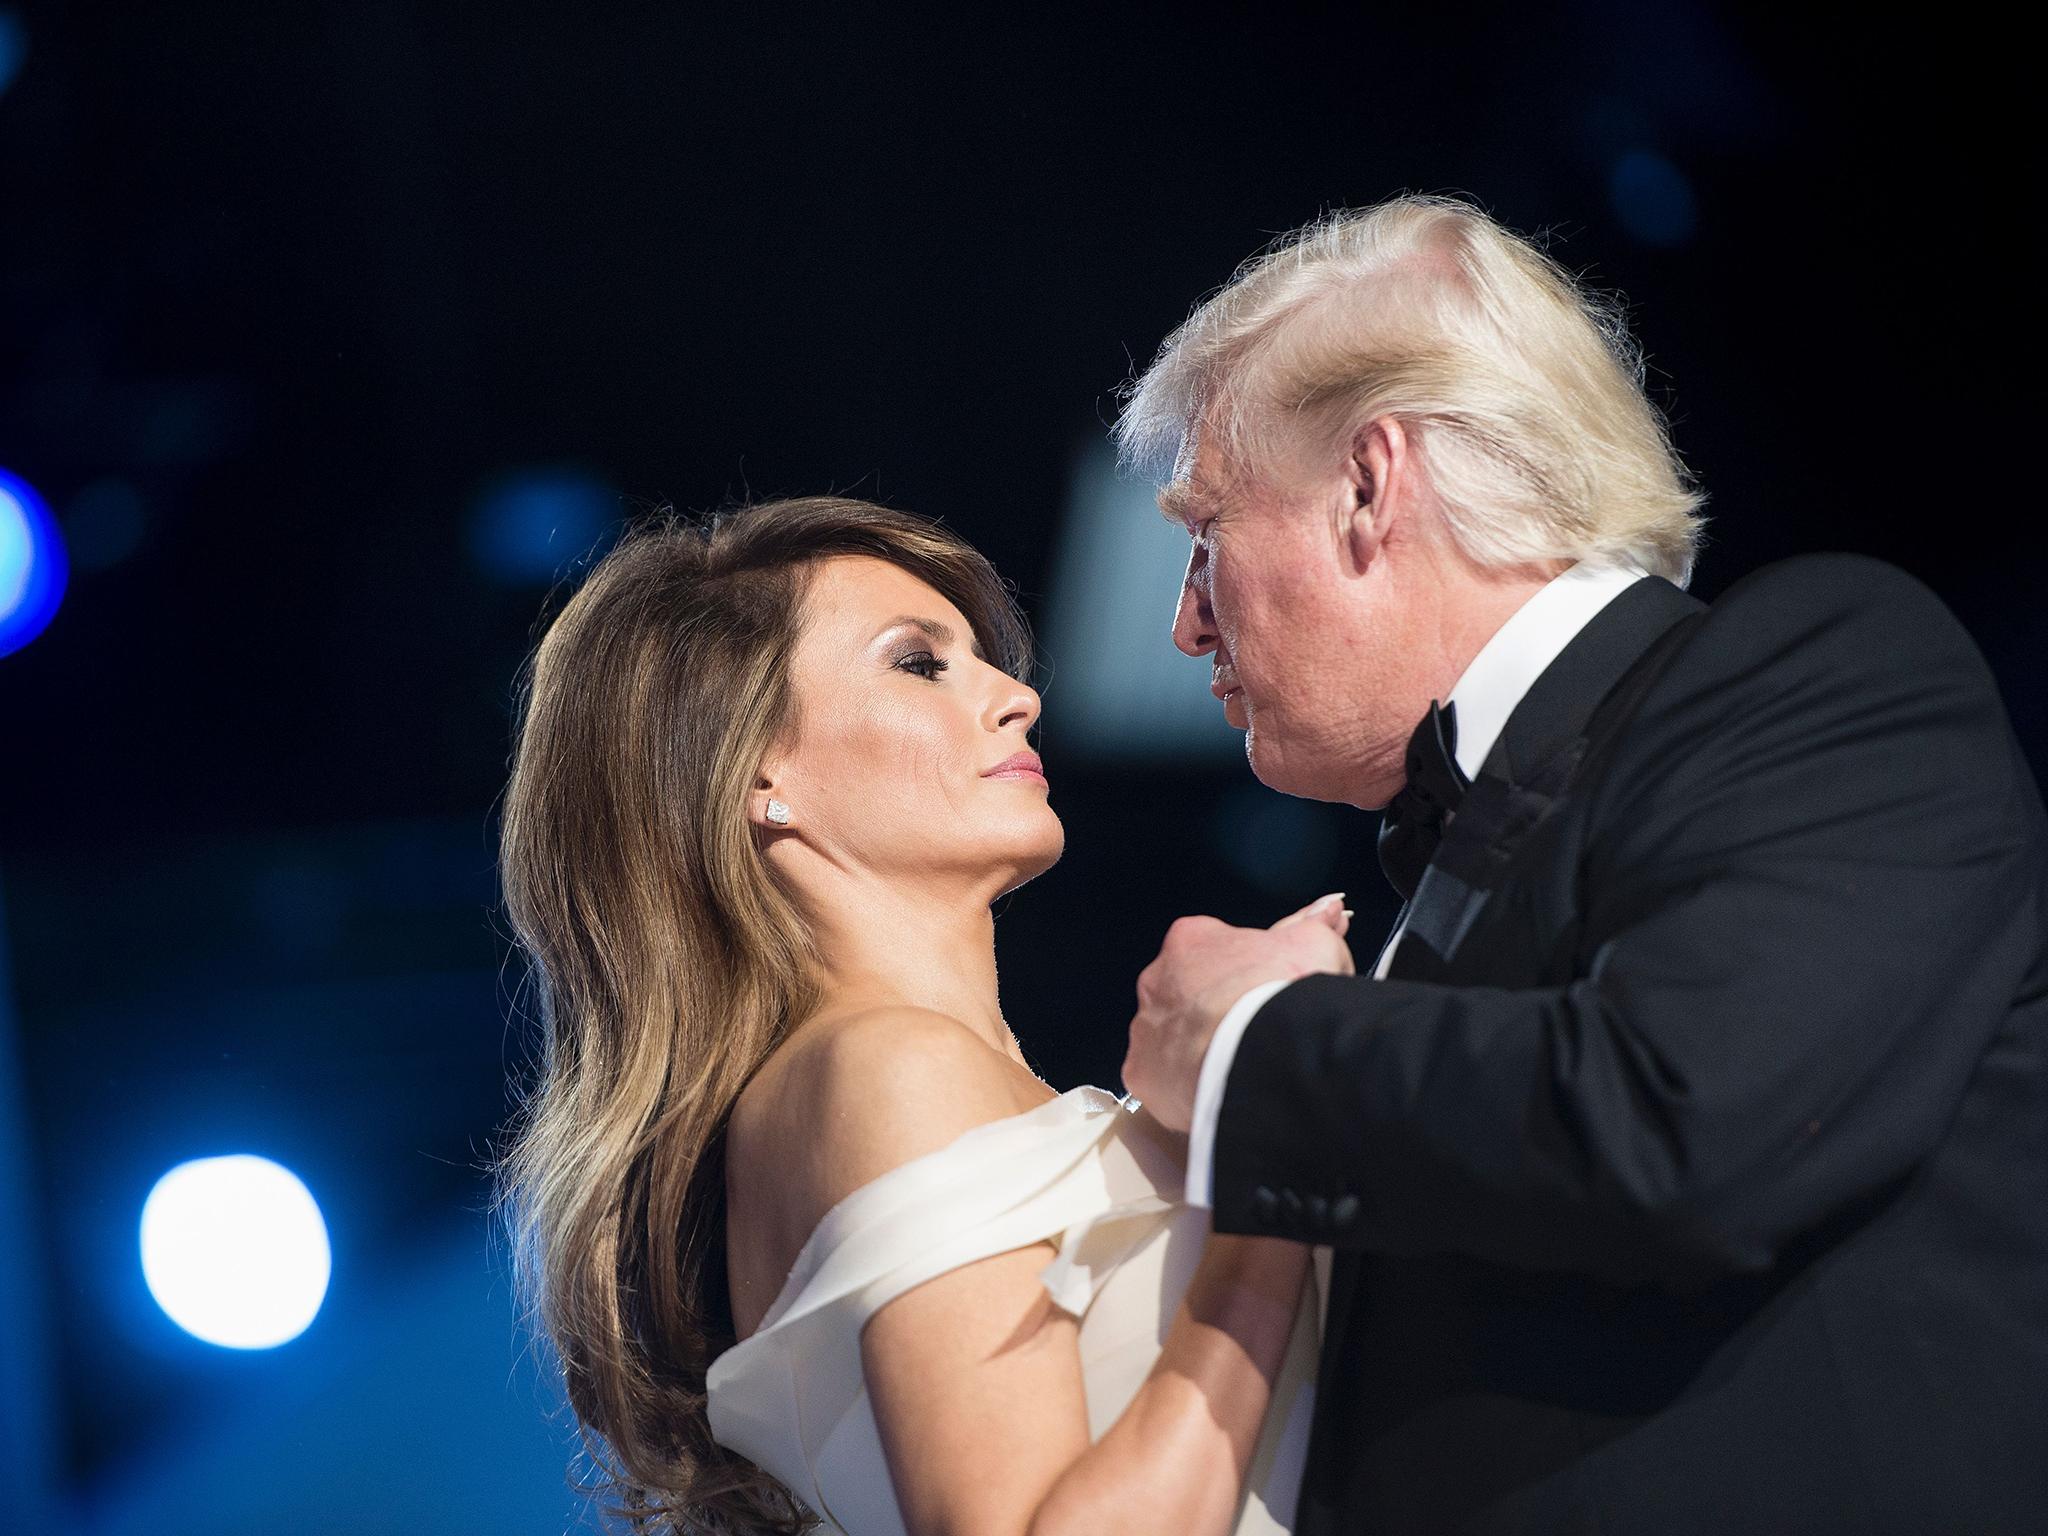 US first lady Melania Trump and US President Donald Trump dance during the Freedom Ball January 20, 2017 in Washington, DC.